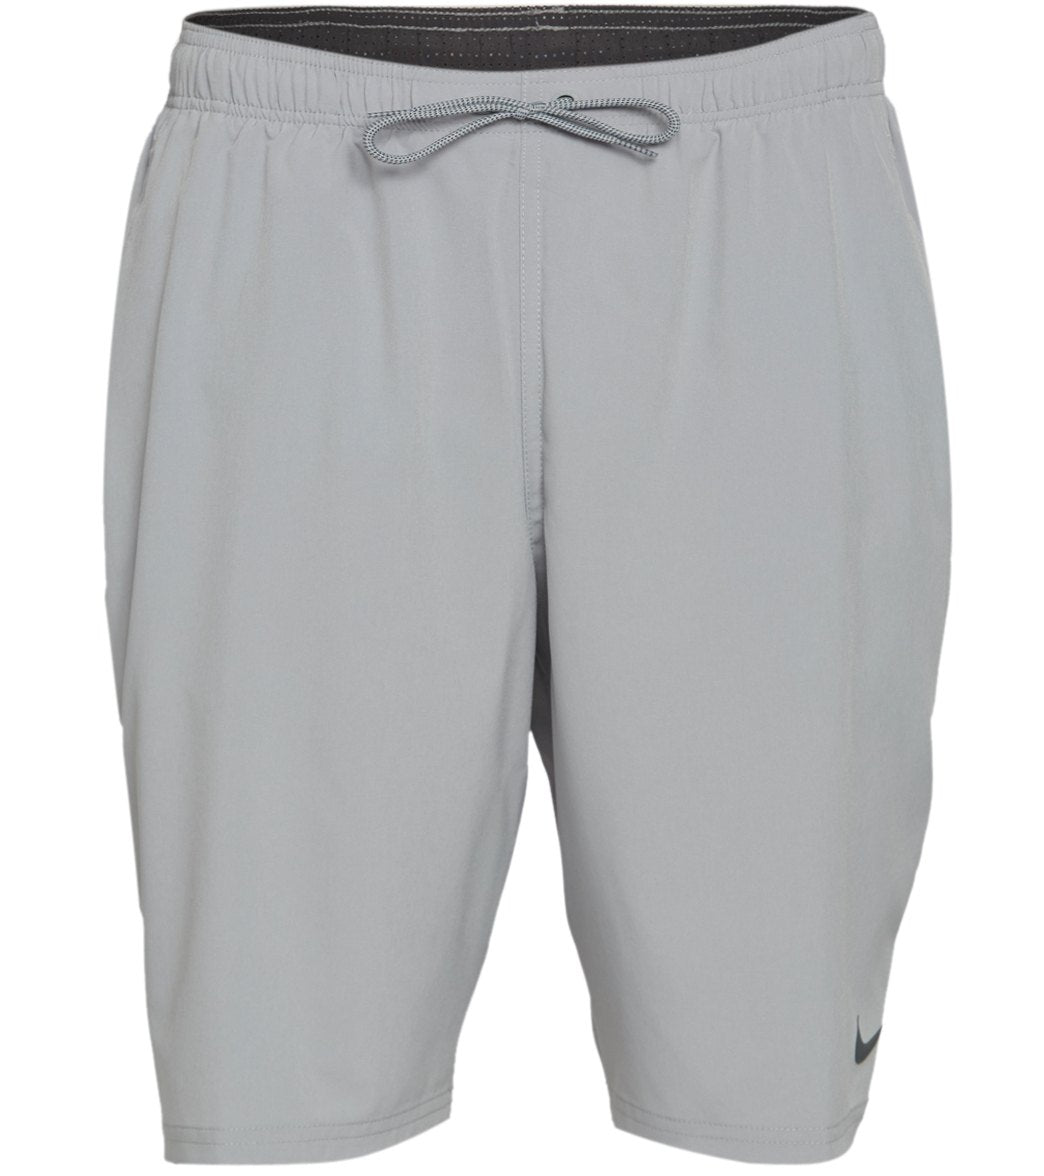 Nike Men's 20 Contend Volley Short - Light Smoke Grey Small Polyester - Swimoutlet.com